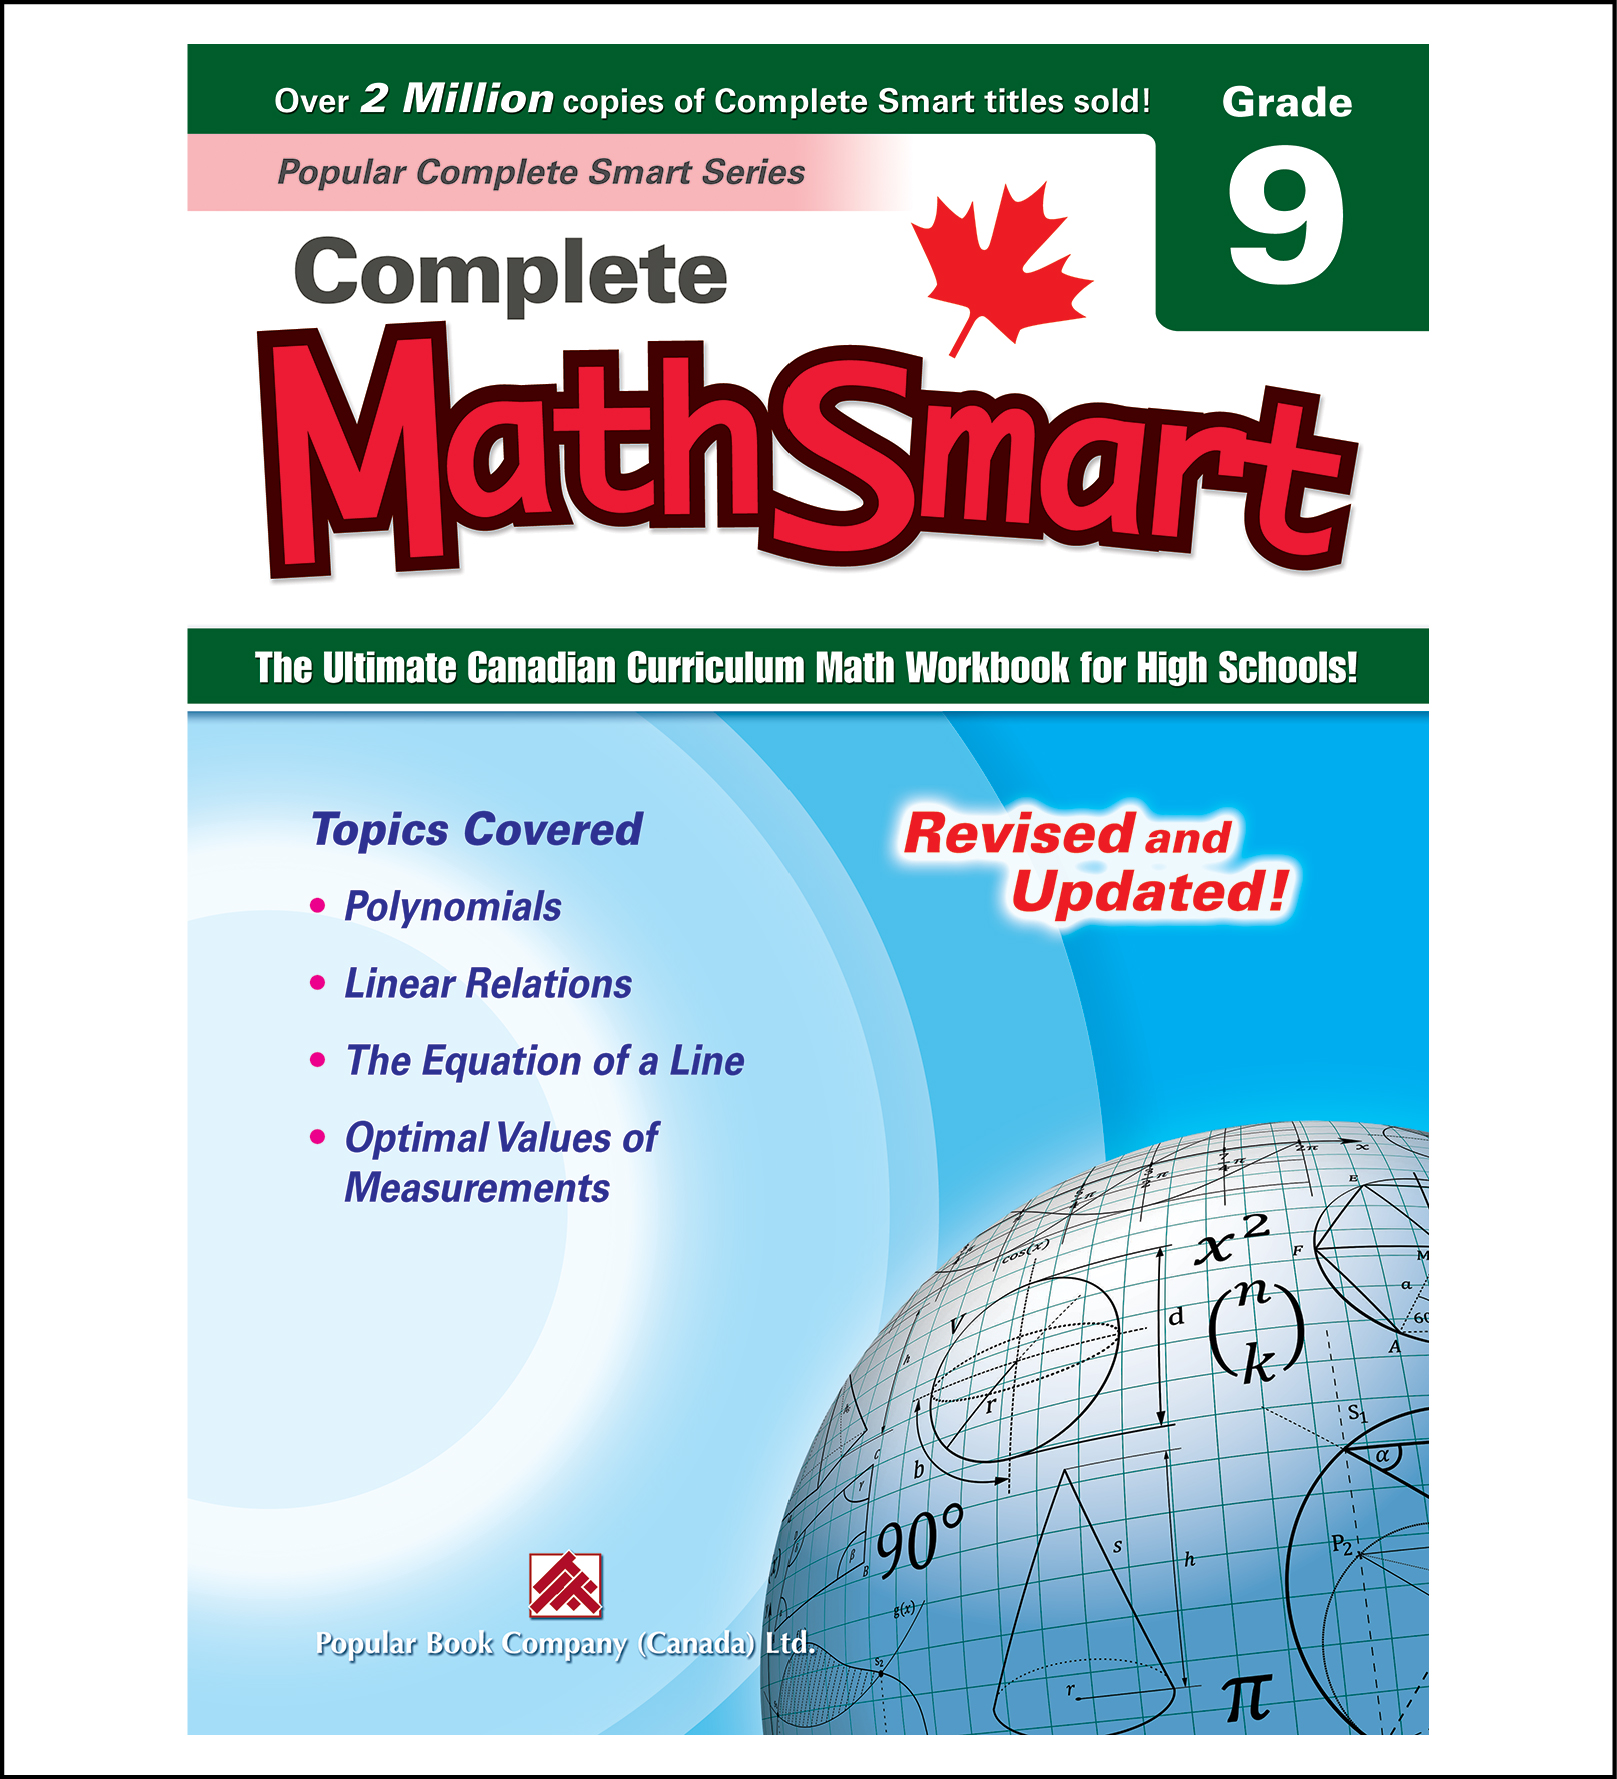 Complete Mathsmart Grade 9 Revised And Updated Popular Book Company Canada Ltd 4616